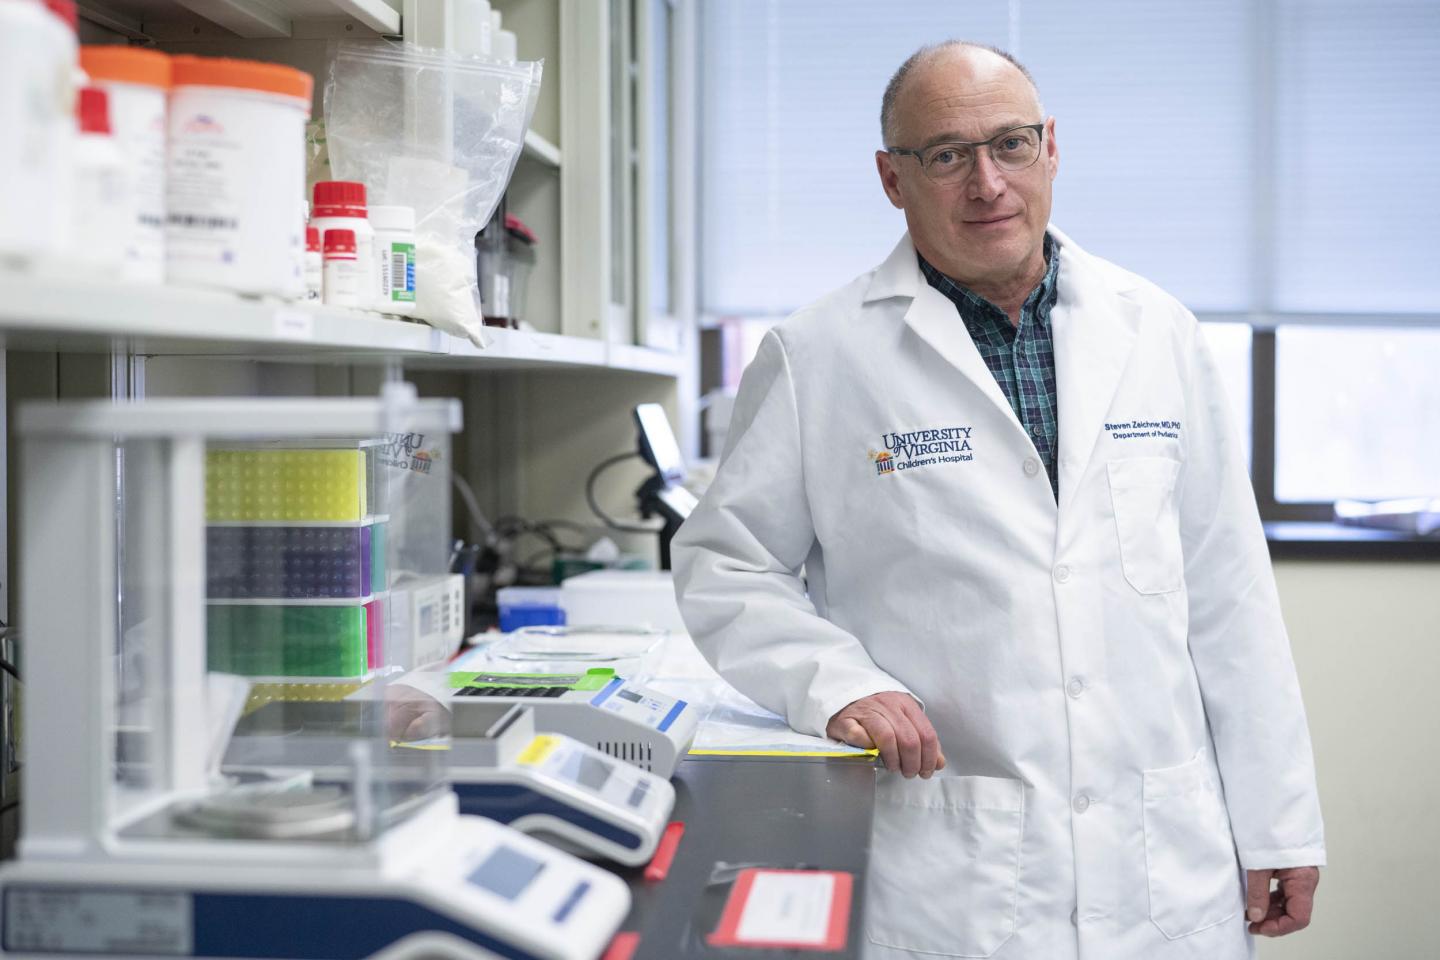 Steven L. Zeichner, MD, PhD, of UVA Children's, says the vaccine could be produced very quickly, at very low cost, in existing factories around the world. The vaccine was developed using a platform Zeichner invented to speed vaccine development.

CREDIT
Dan Addison | UVA Communications